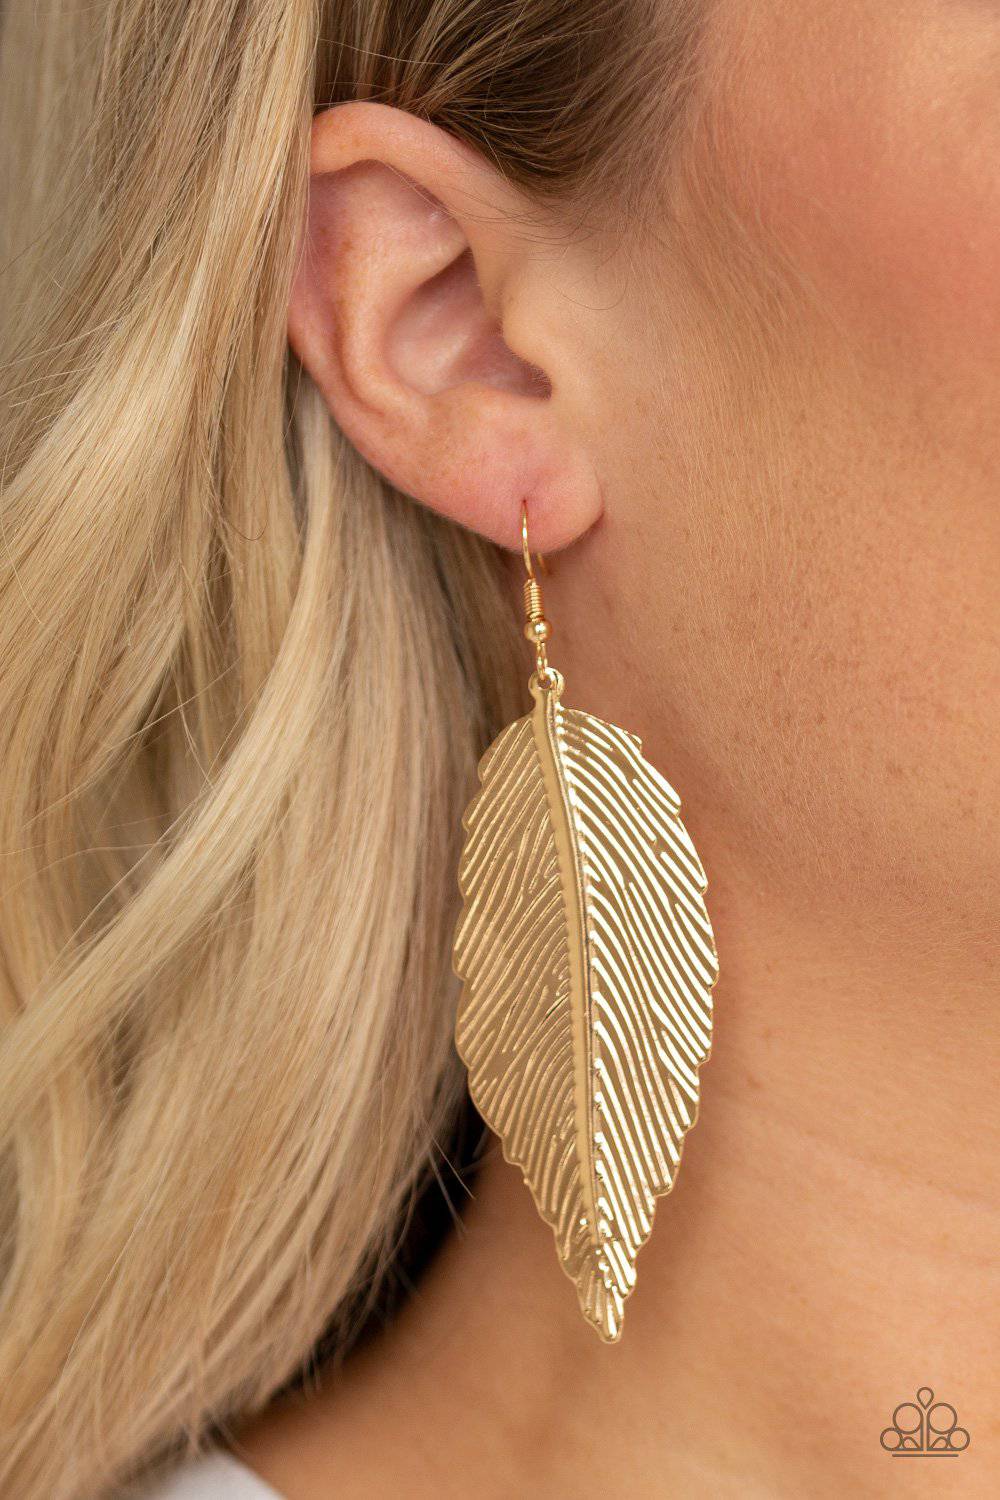 Lookin For A FLIGHT - Gold Feather Earrings - Paparazzi Accessories - GlaMarous Titi Jewels